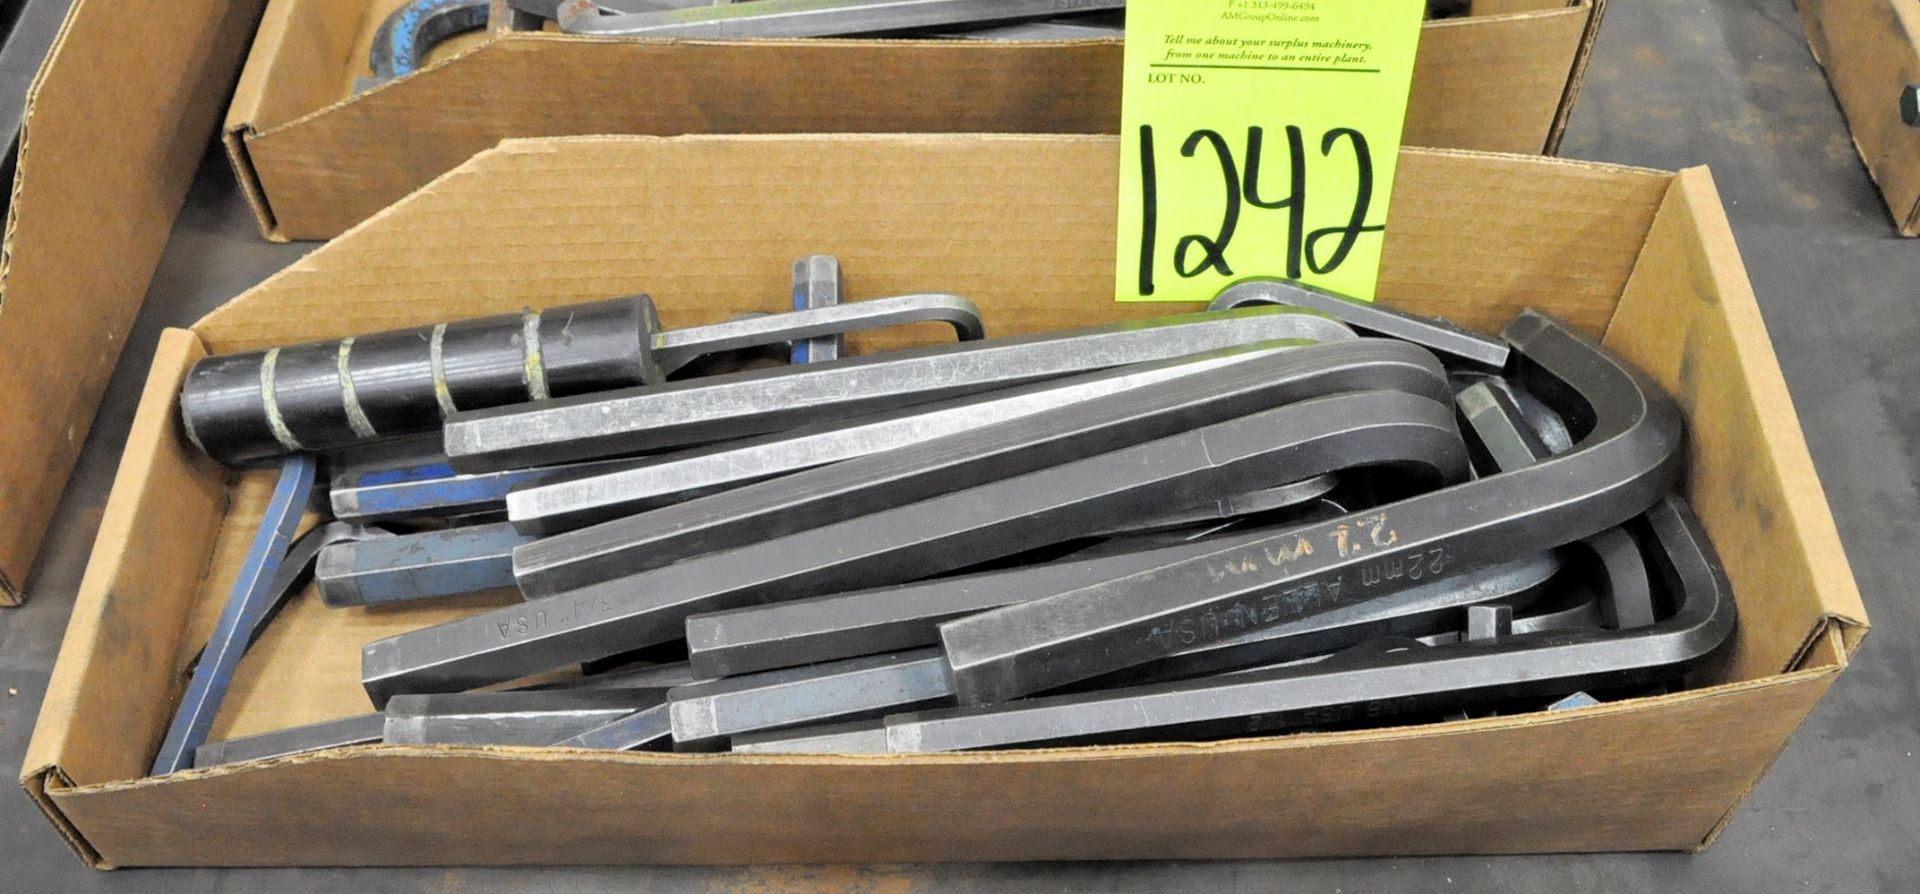 Lot-Large Allen Wrenches in (5) Boxes, (G-15), (Yellow Tag) - Image 2 of 3